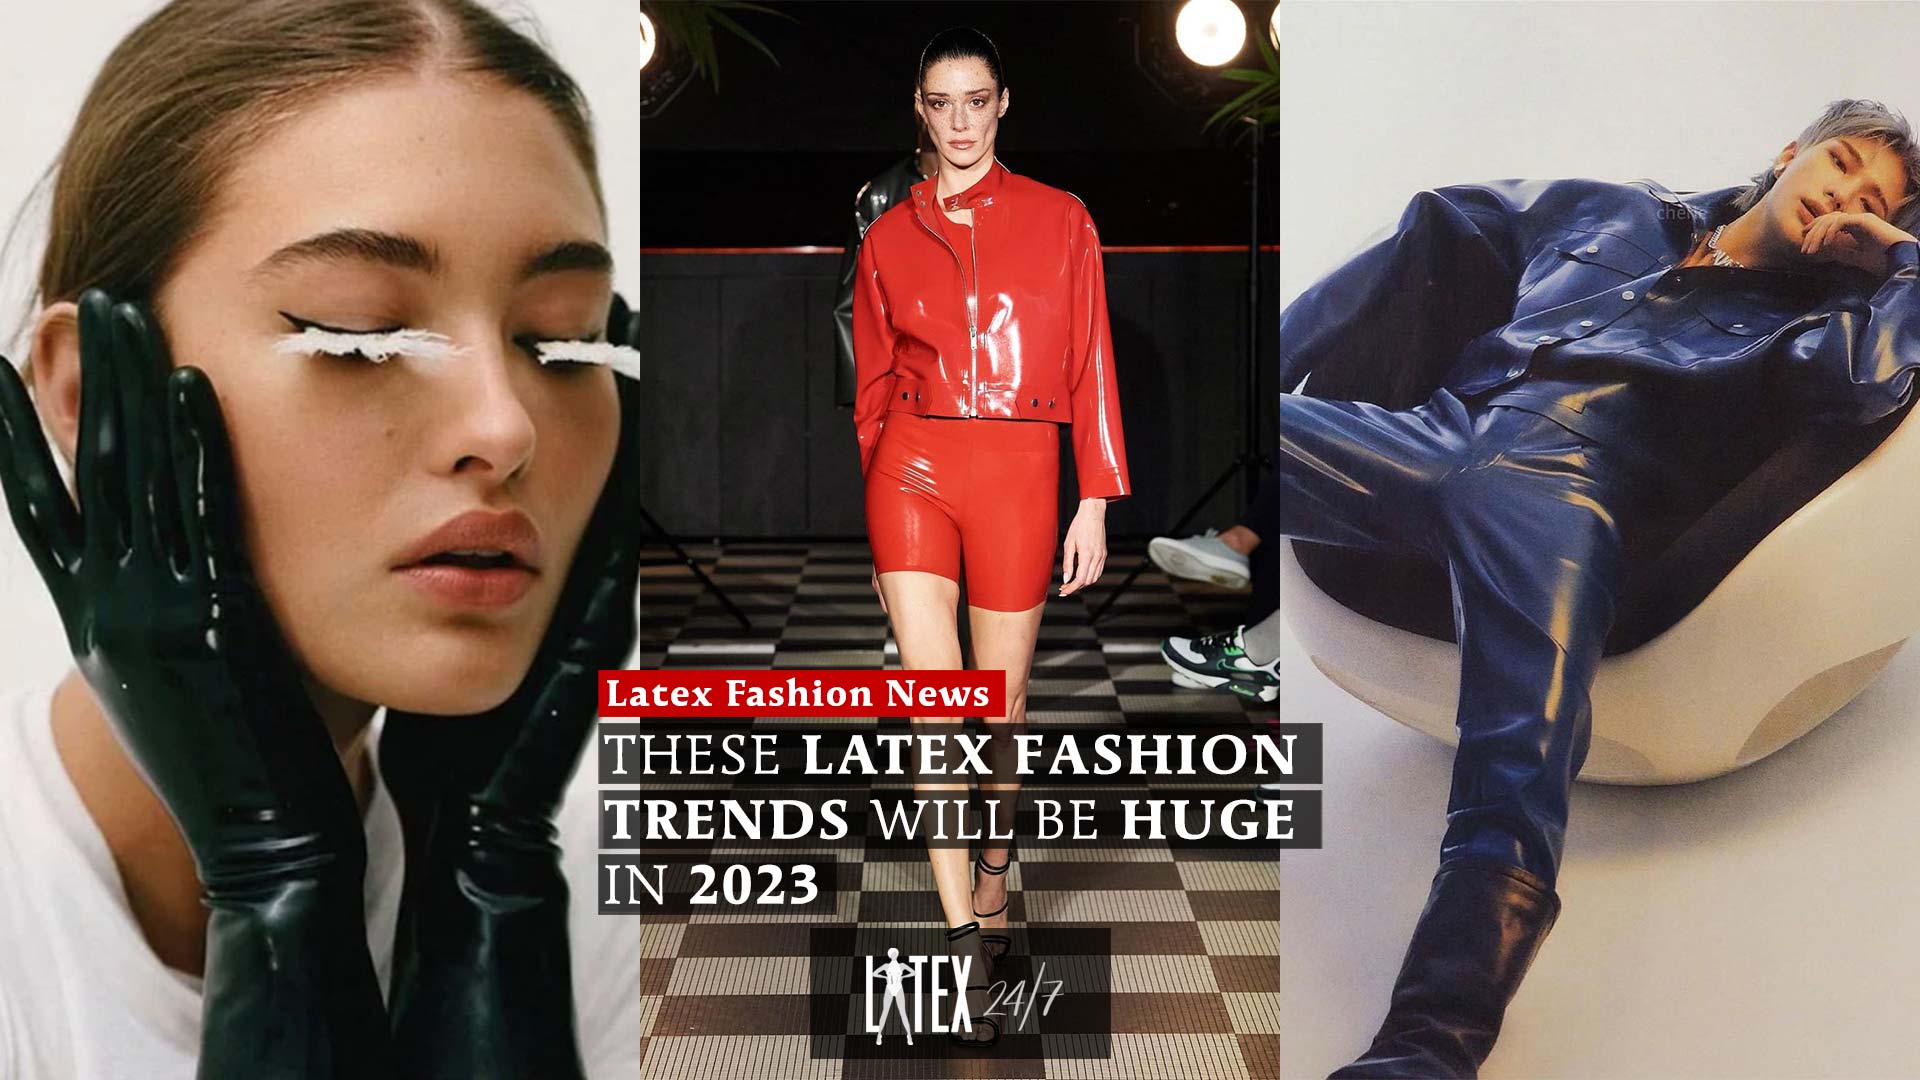 These Latex Fashion Trends Will Be HUGE in 2023 - Latex24/7